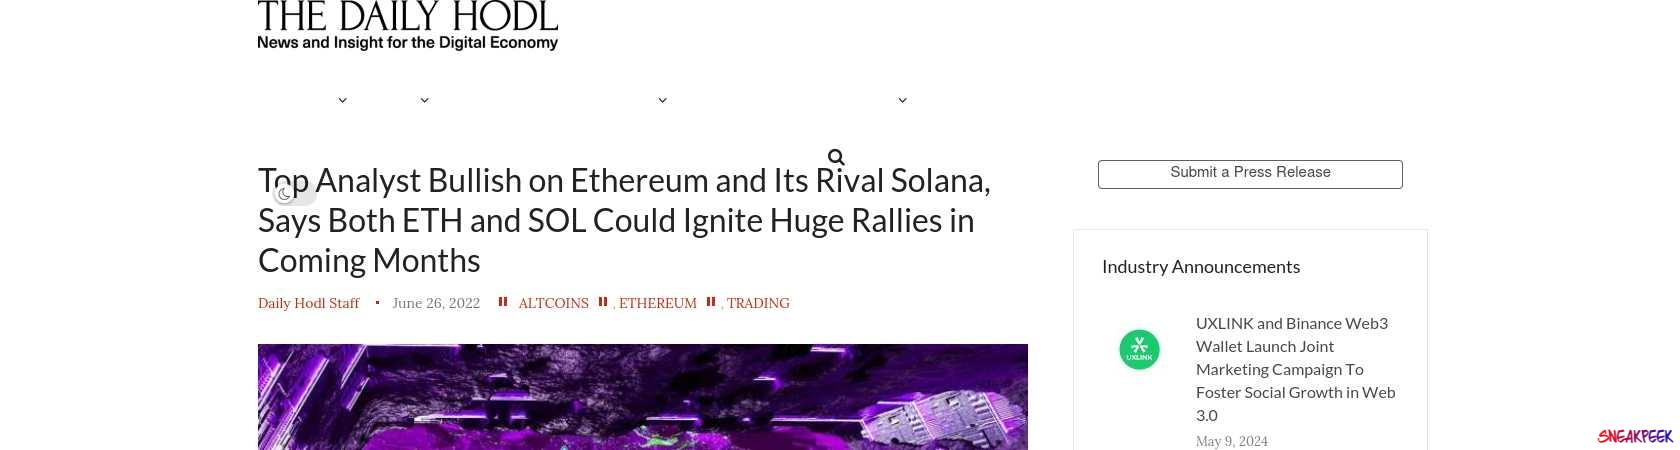 Read the full Article:  ⭲ Top Analyst Bullish on Ethereum and Its Rival Solana, Says Both ETH and SOL Could Ignite Huge Rallies in Coming Months